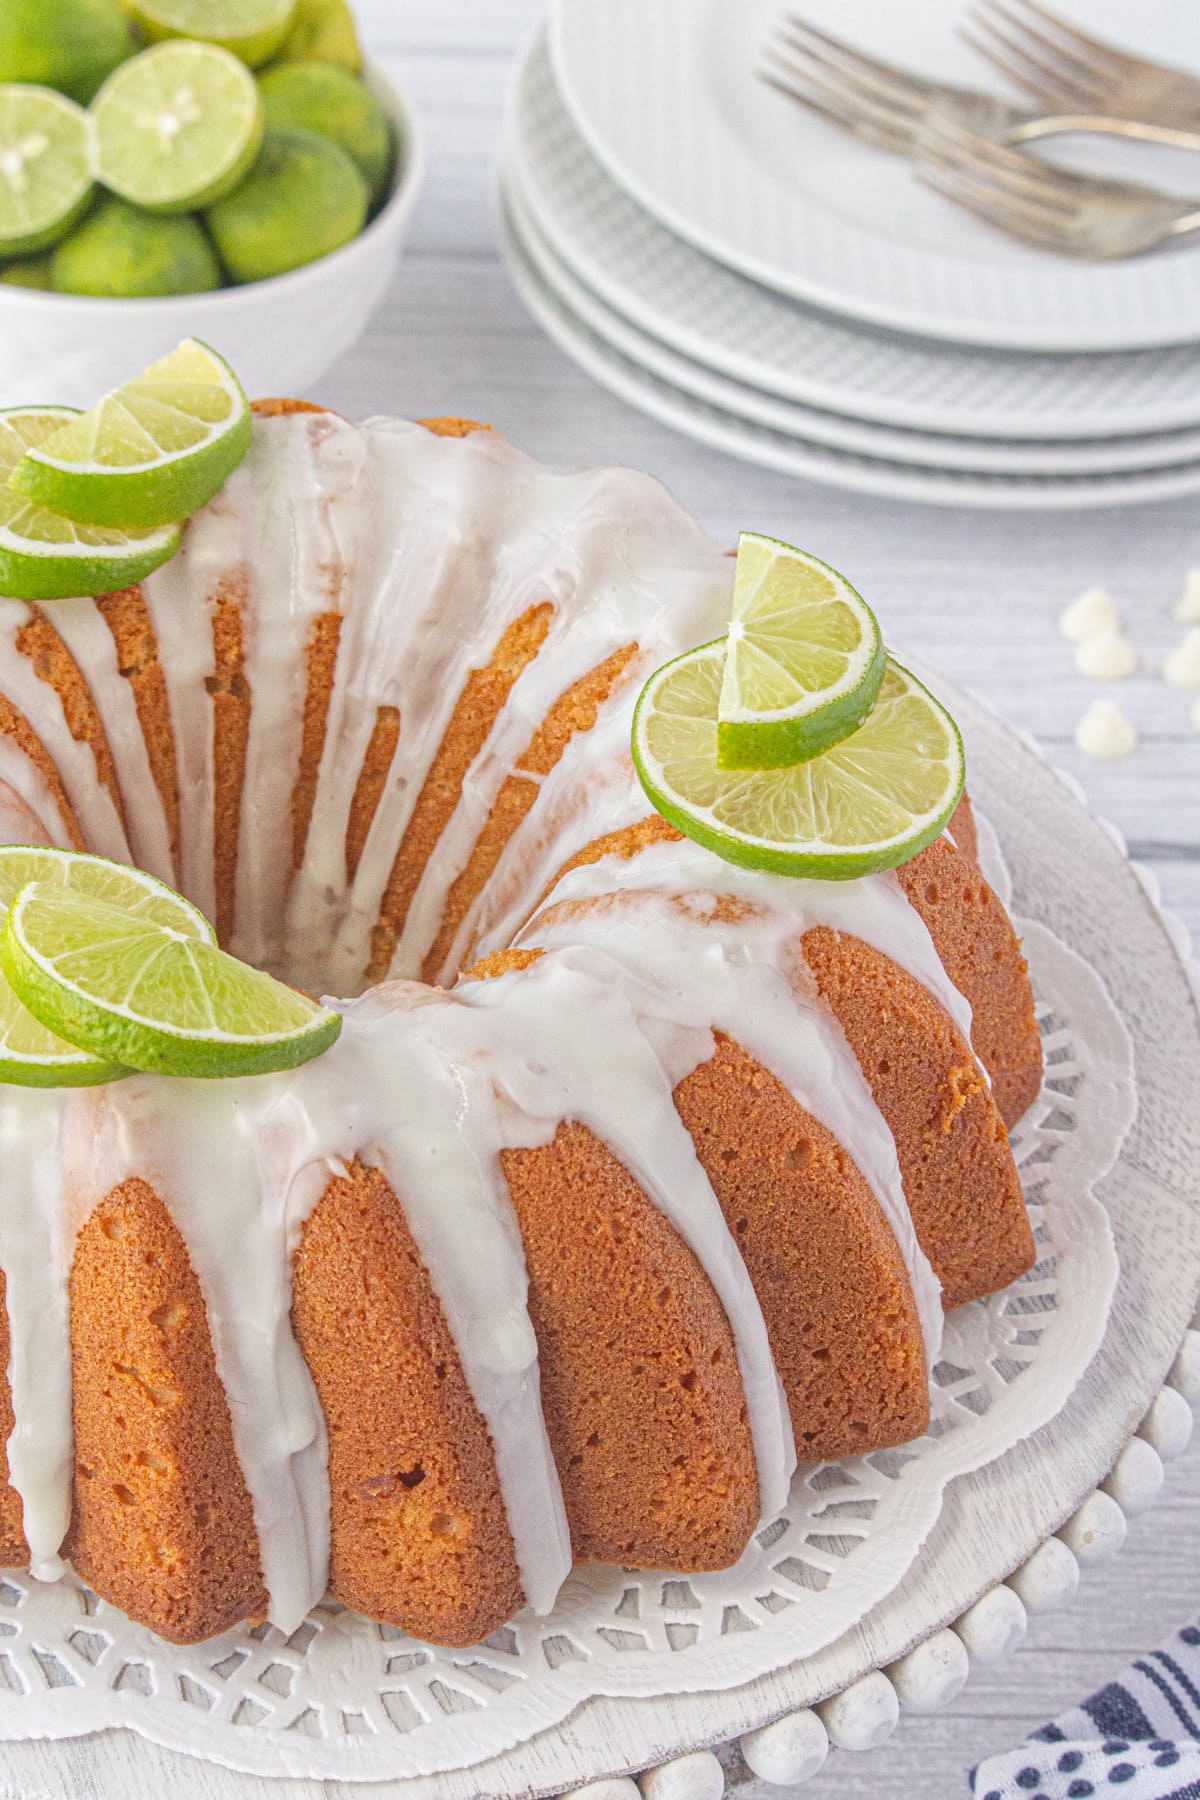 A white chocolate key lime bundt cake on a serving platter garnished with lime slices.